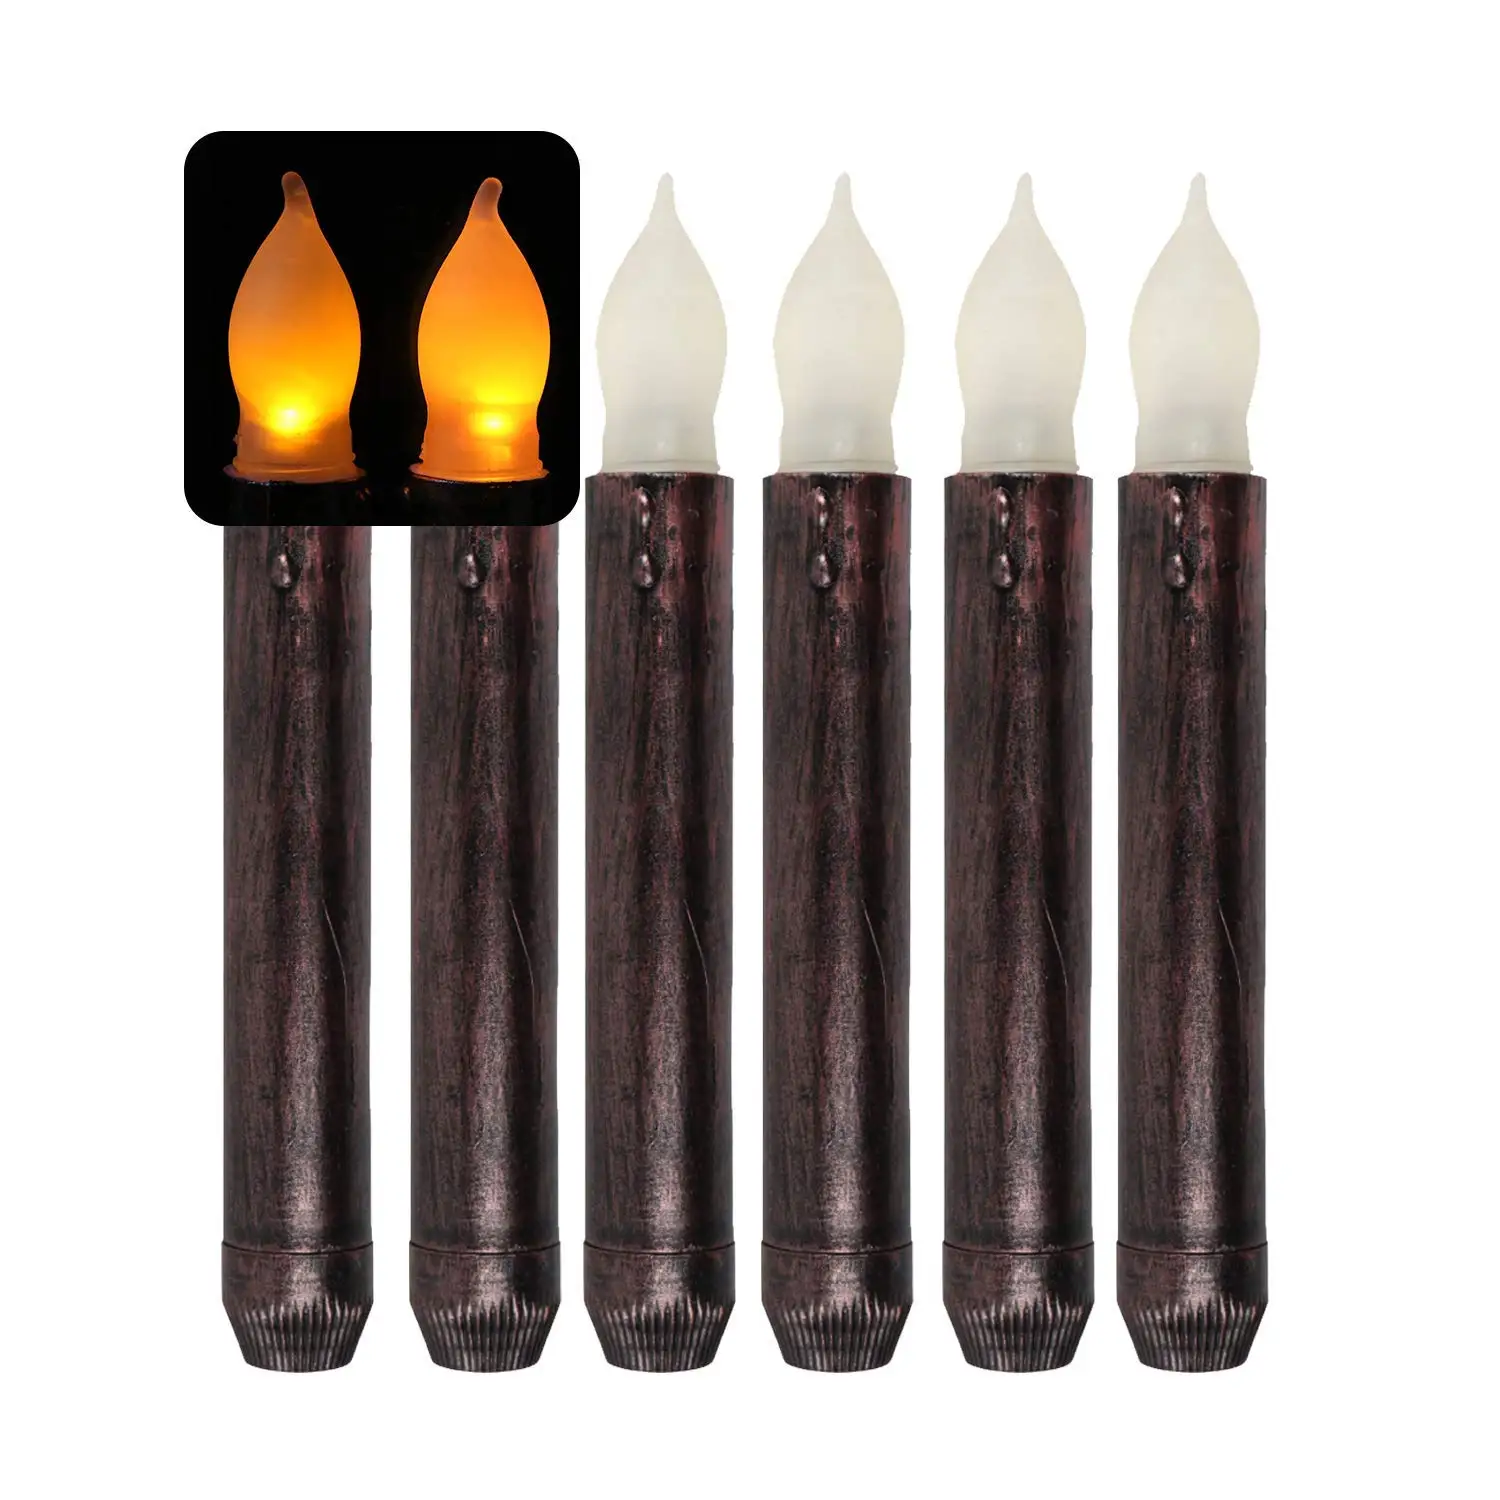 Micandle 12PCS LED Candlesticks Taper Candles Window for Thanksgiving Wedding Christmas Day,Battery Operated Flickering Flameless Electric Yellow Taper Candles